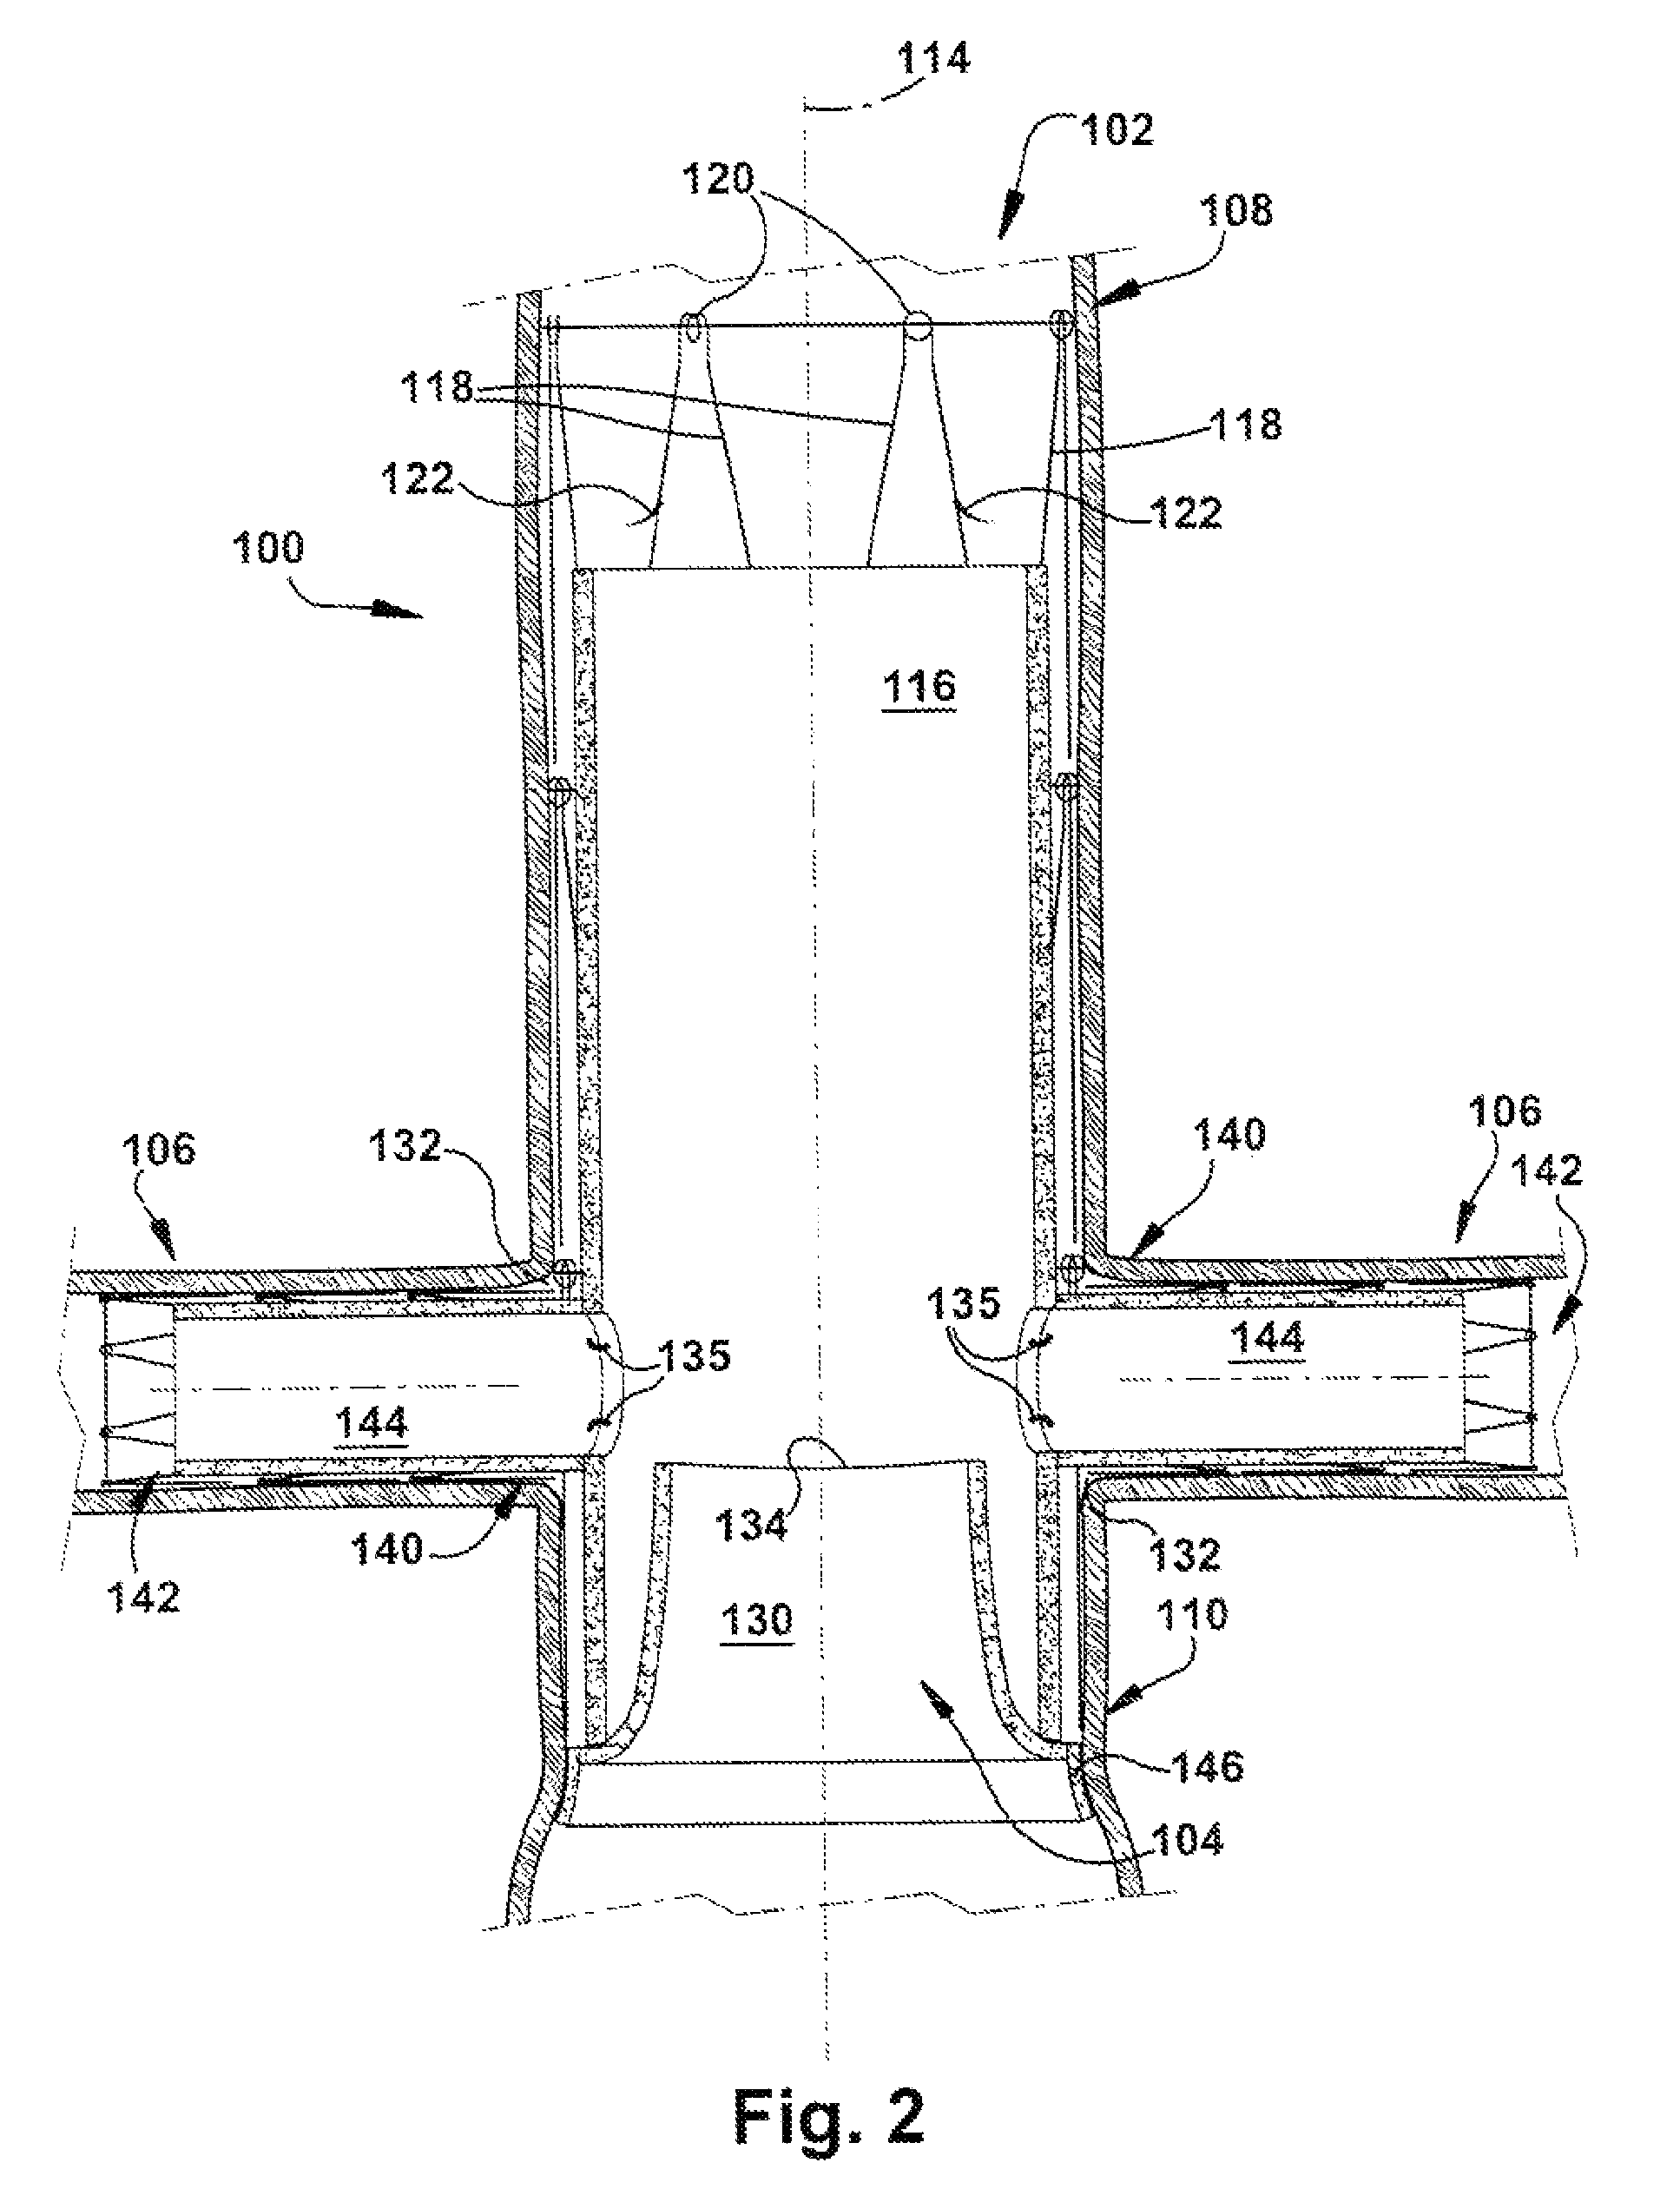 Apparatus for repairing the function of a native aortic valve